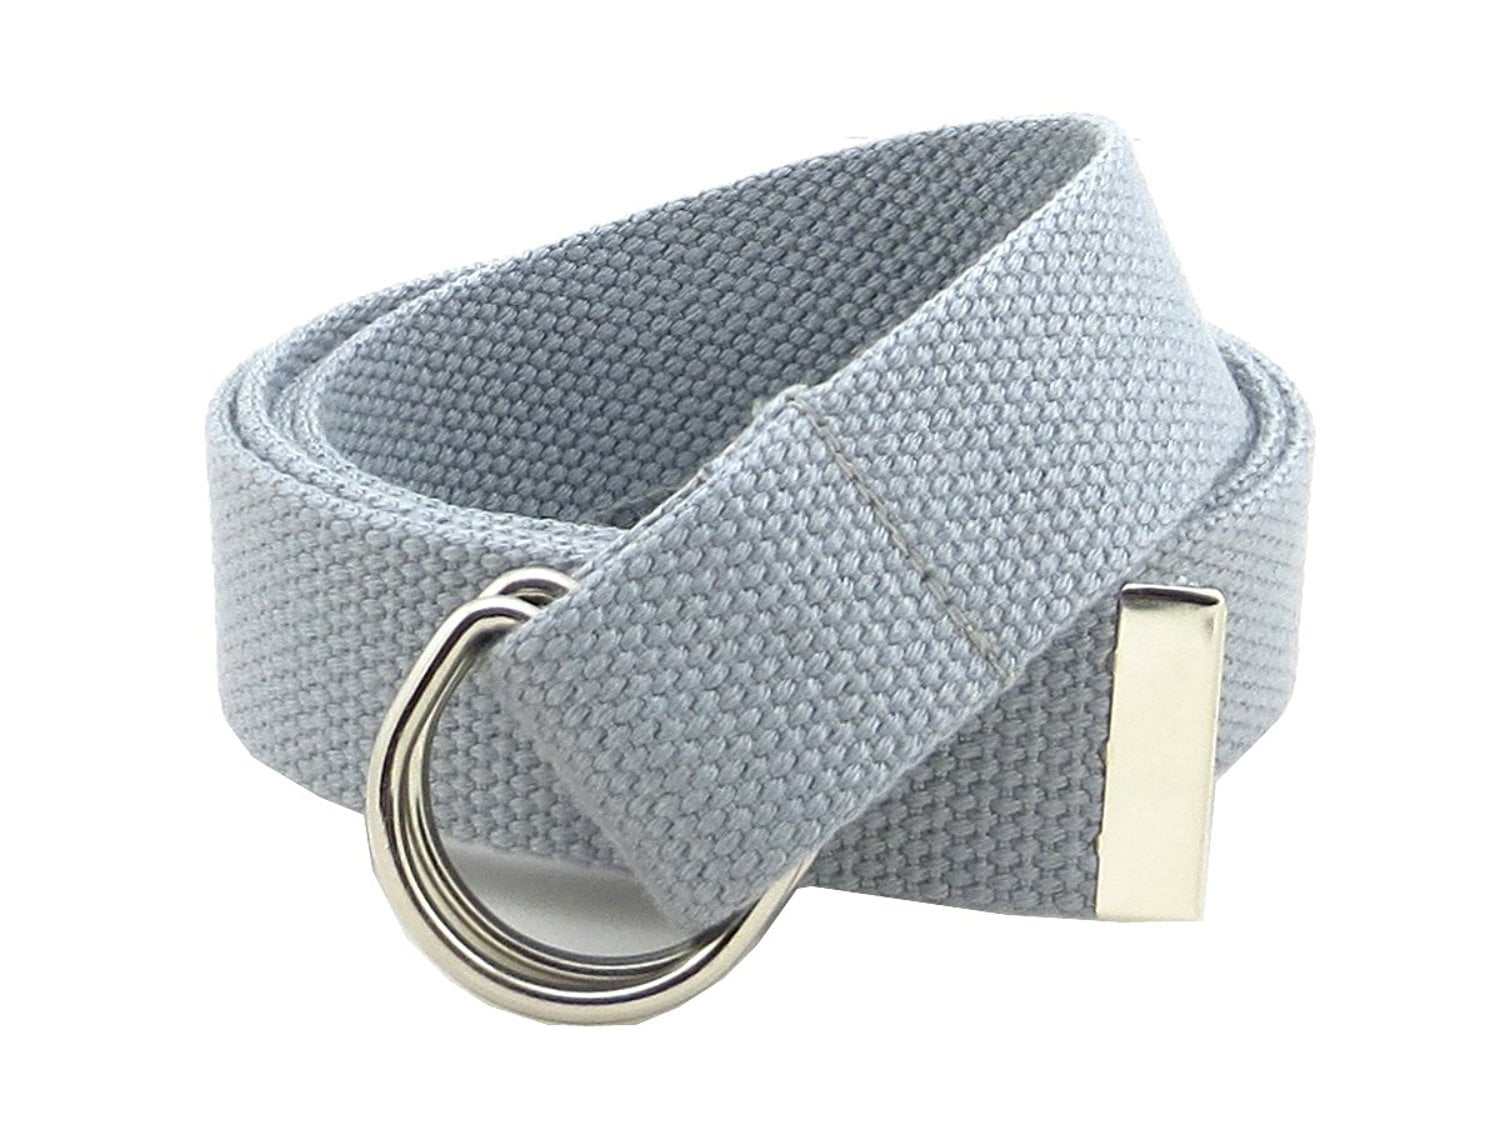 Thin Web Belt Double D-Ring Buckle 1.25 Wide with Metal Tip Solid Color